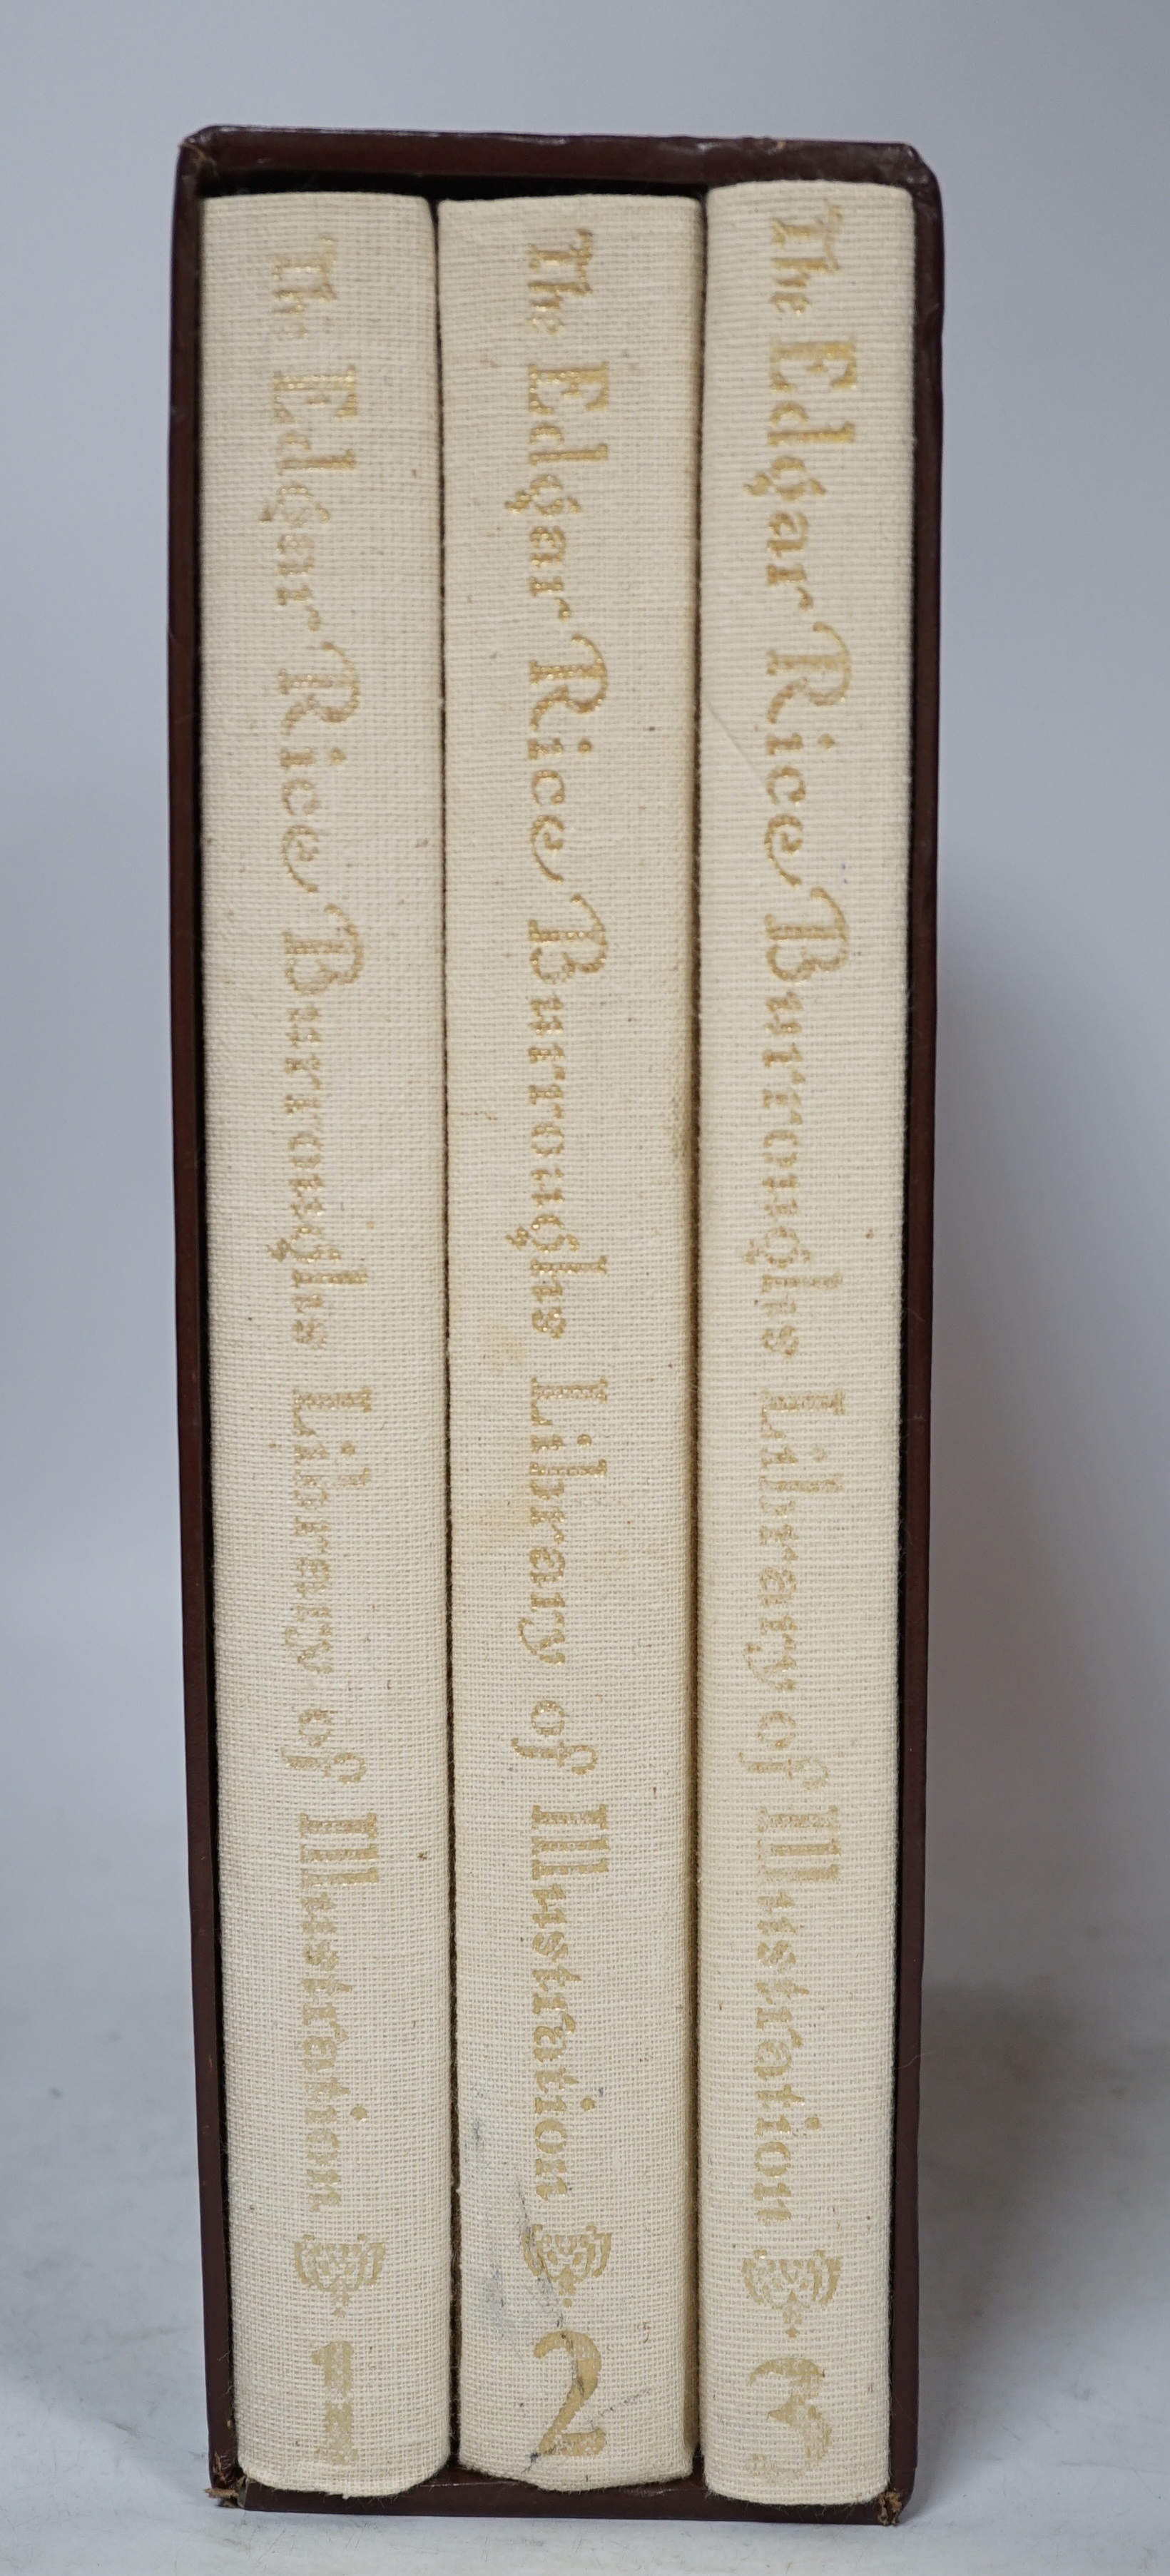 Edgar Rice Burroughs; Library of Illustration, a three volume limited edition in a slip case